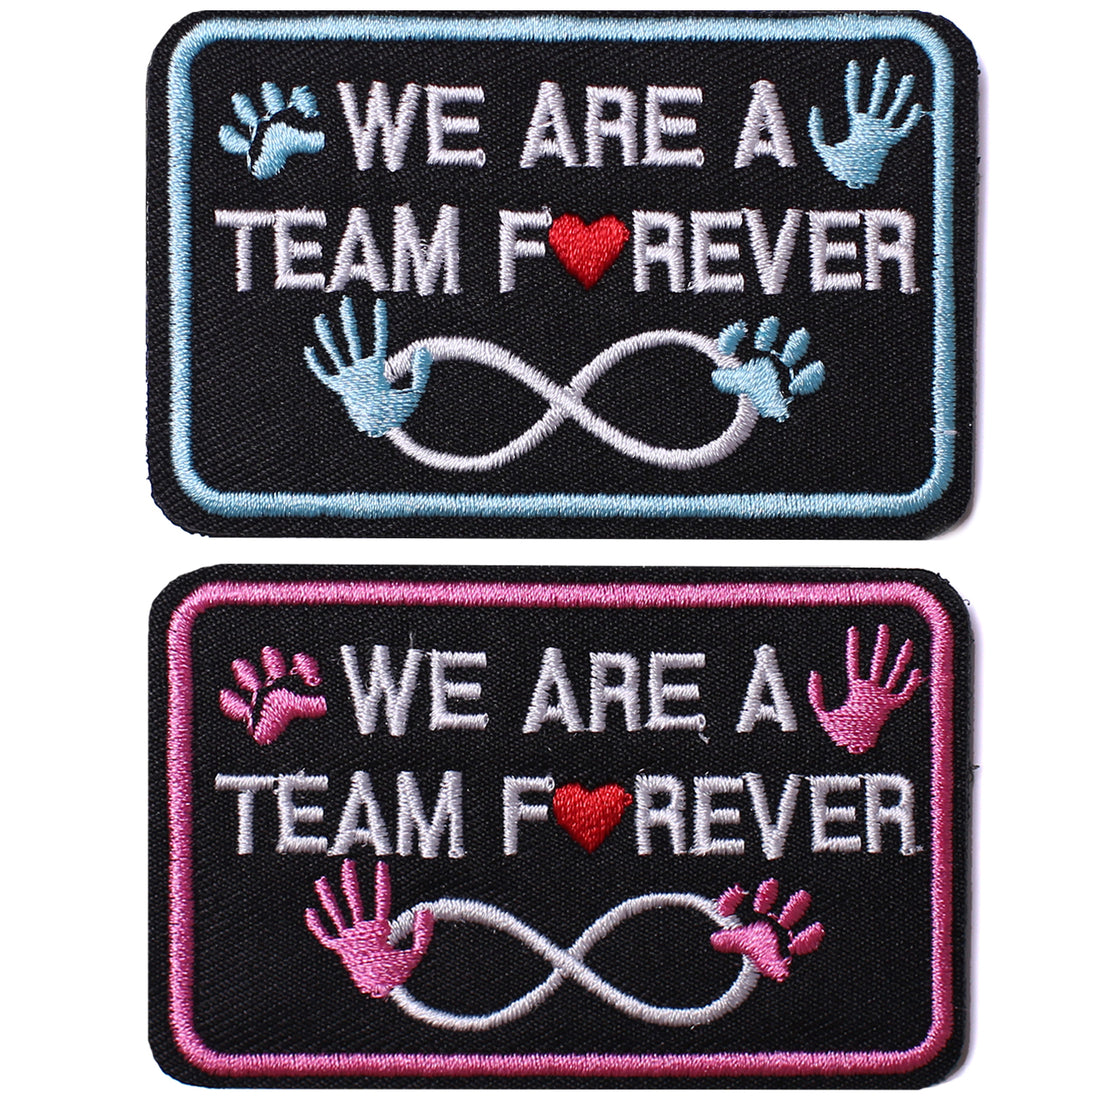 2Pcs Service Dog Patches, We Are A Team Forever, Embroidered Badge Fastener Hook & Loop Emblem